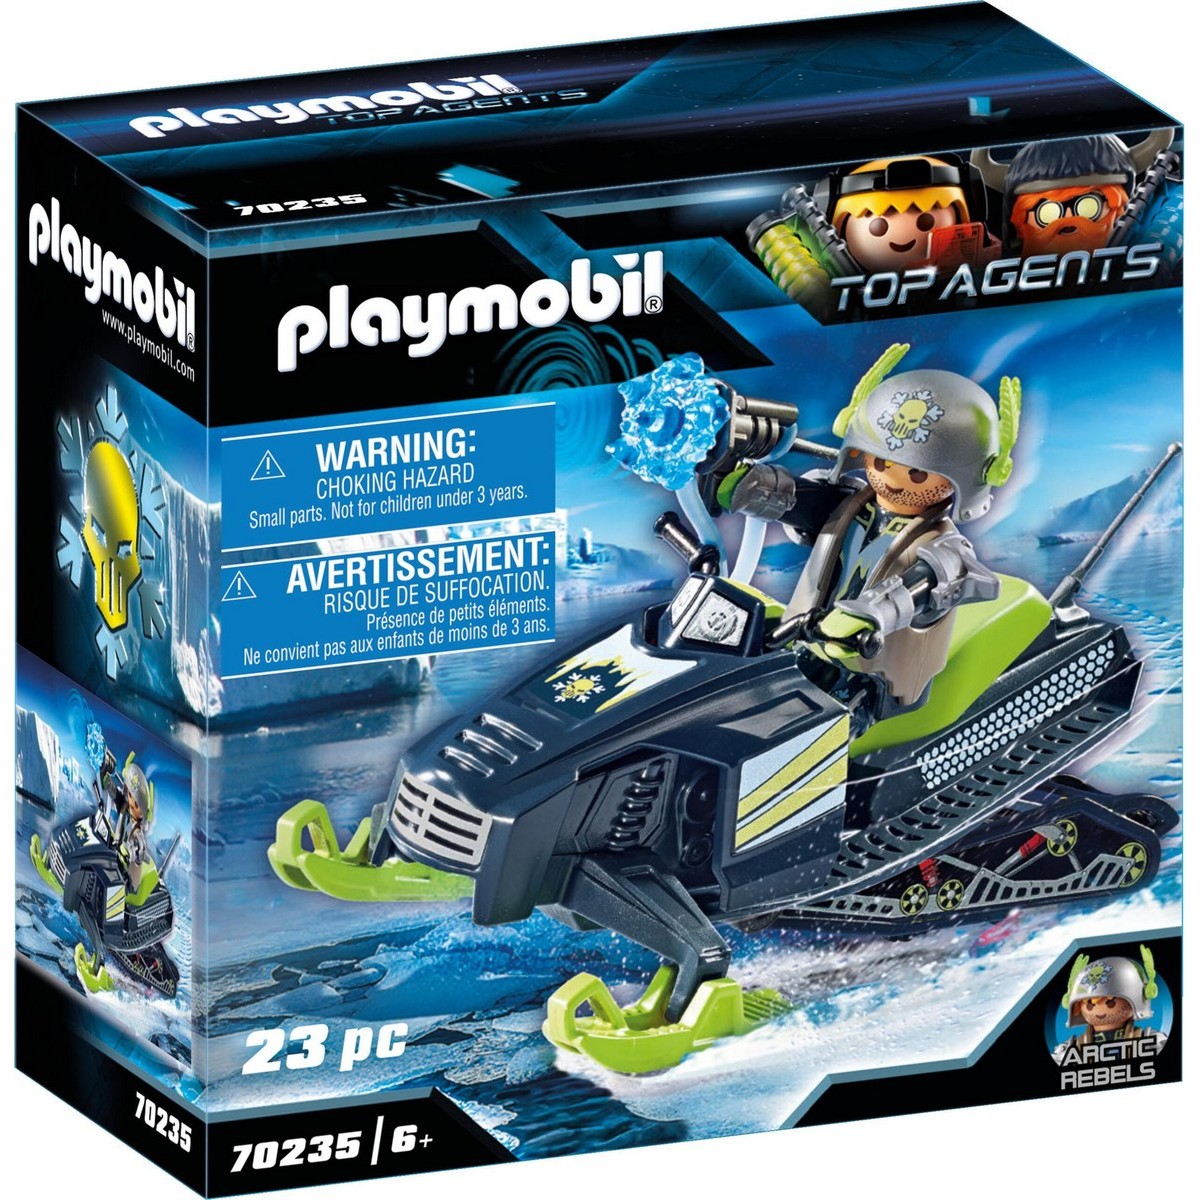 PLAYMOBIL TOP AGENTS 70235 ARCTIC REBELS ICE SCOOTER (OPEN BOX)